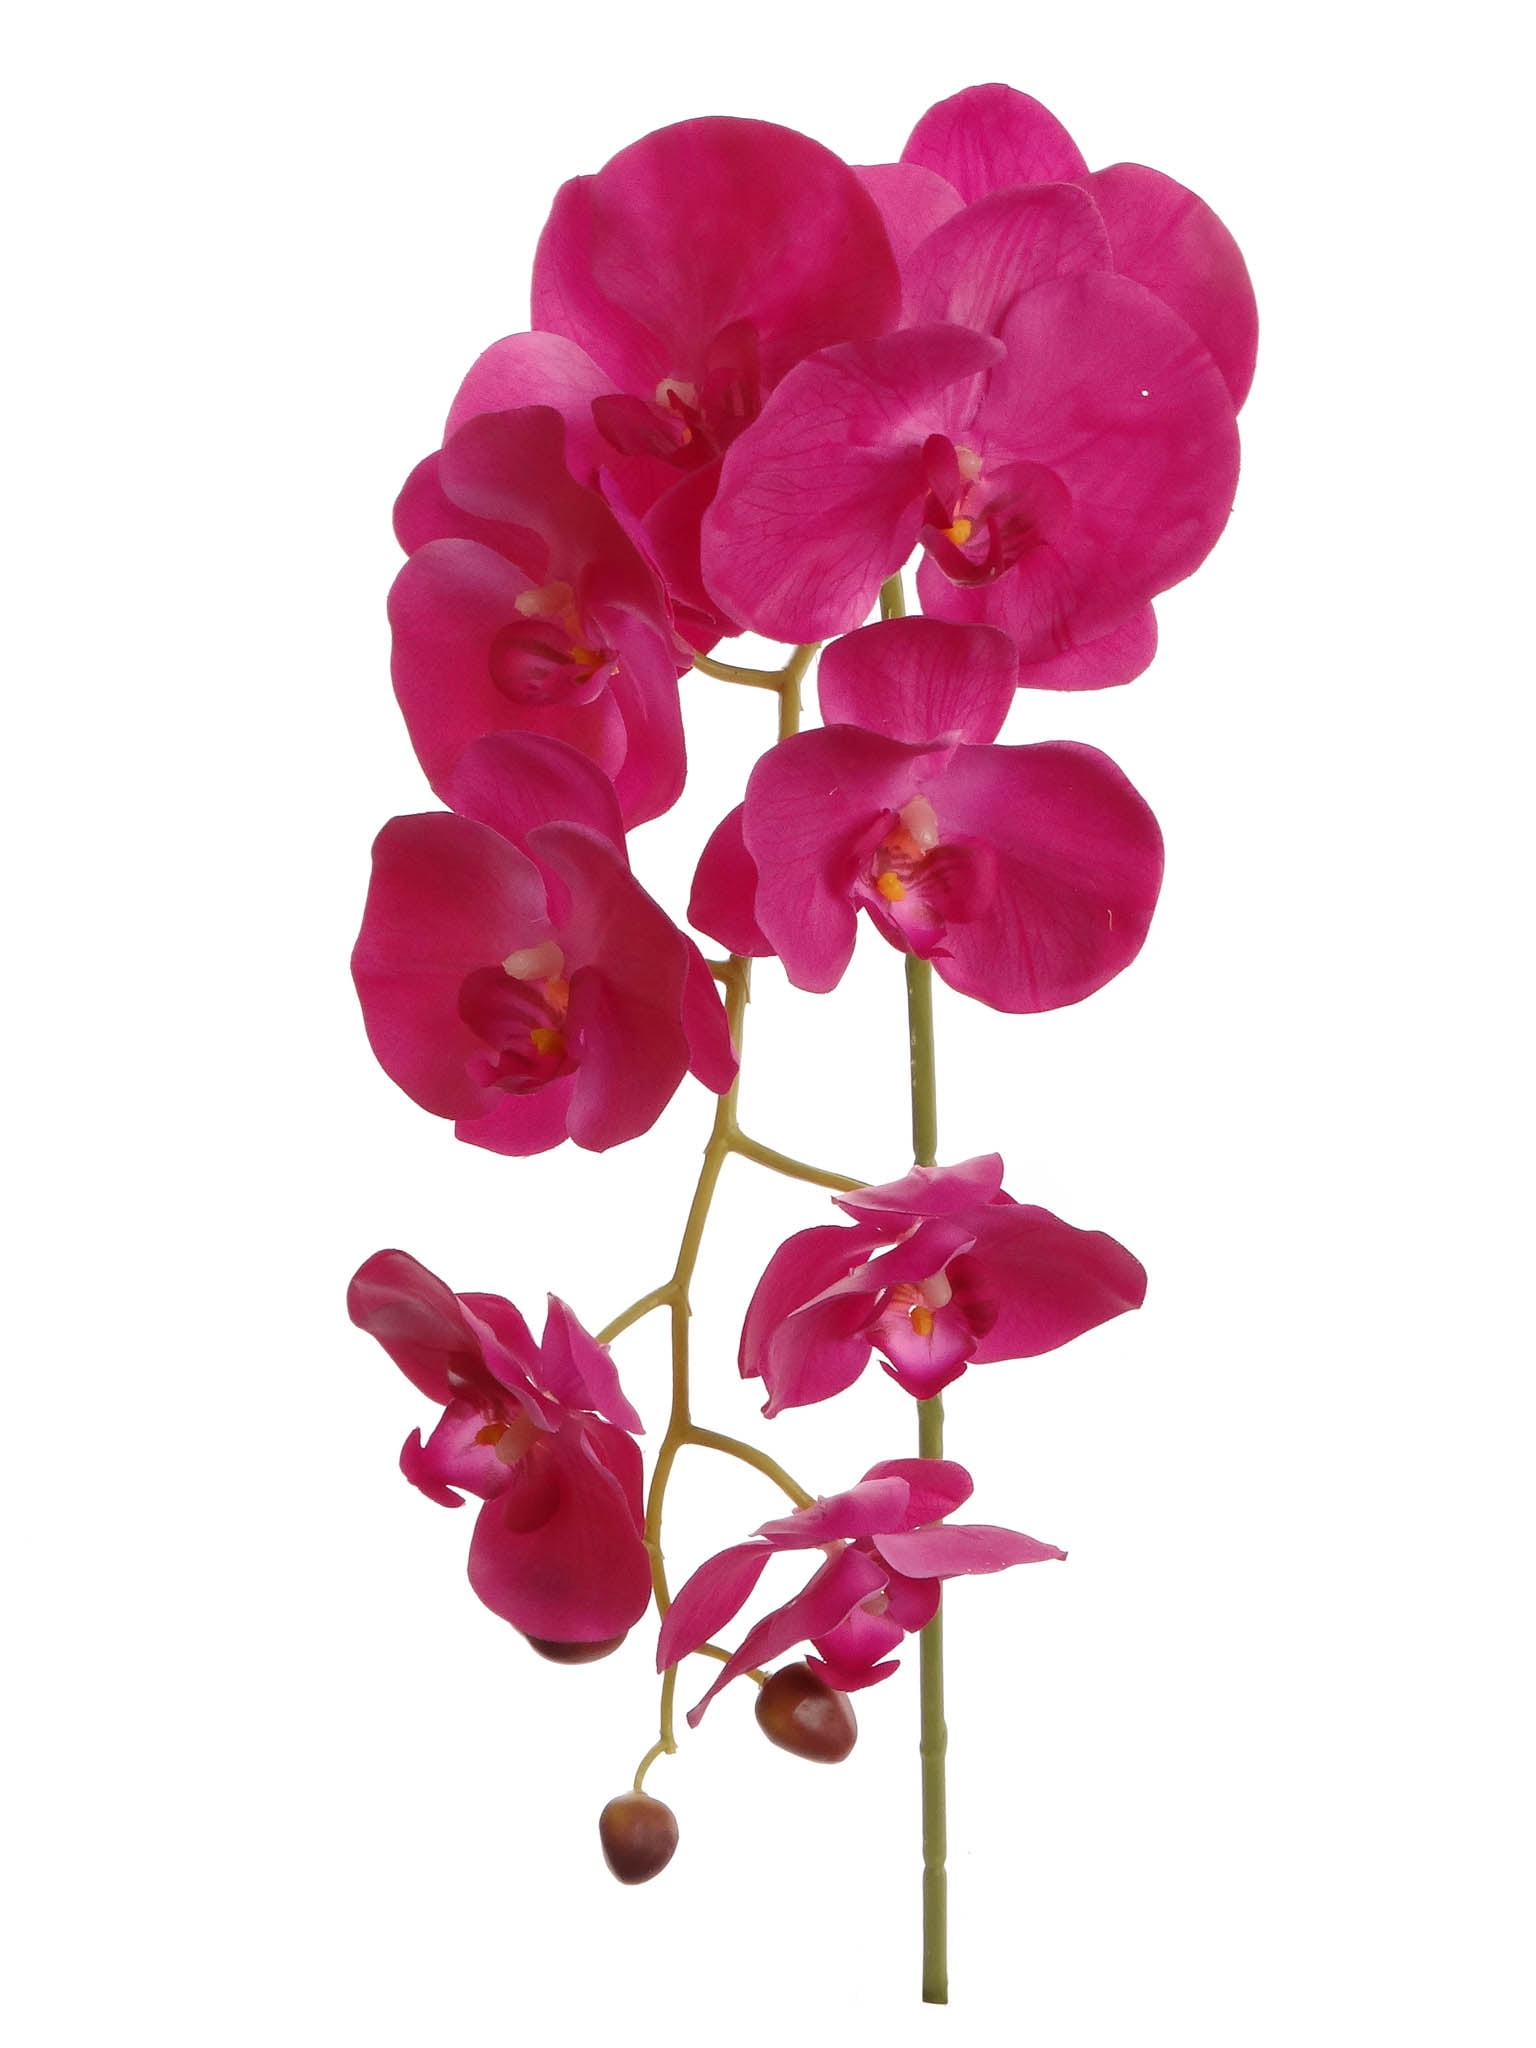 Set of 2 White Artificial Orchid Floral Bundles with Fuchsia Centers